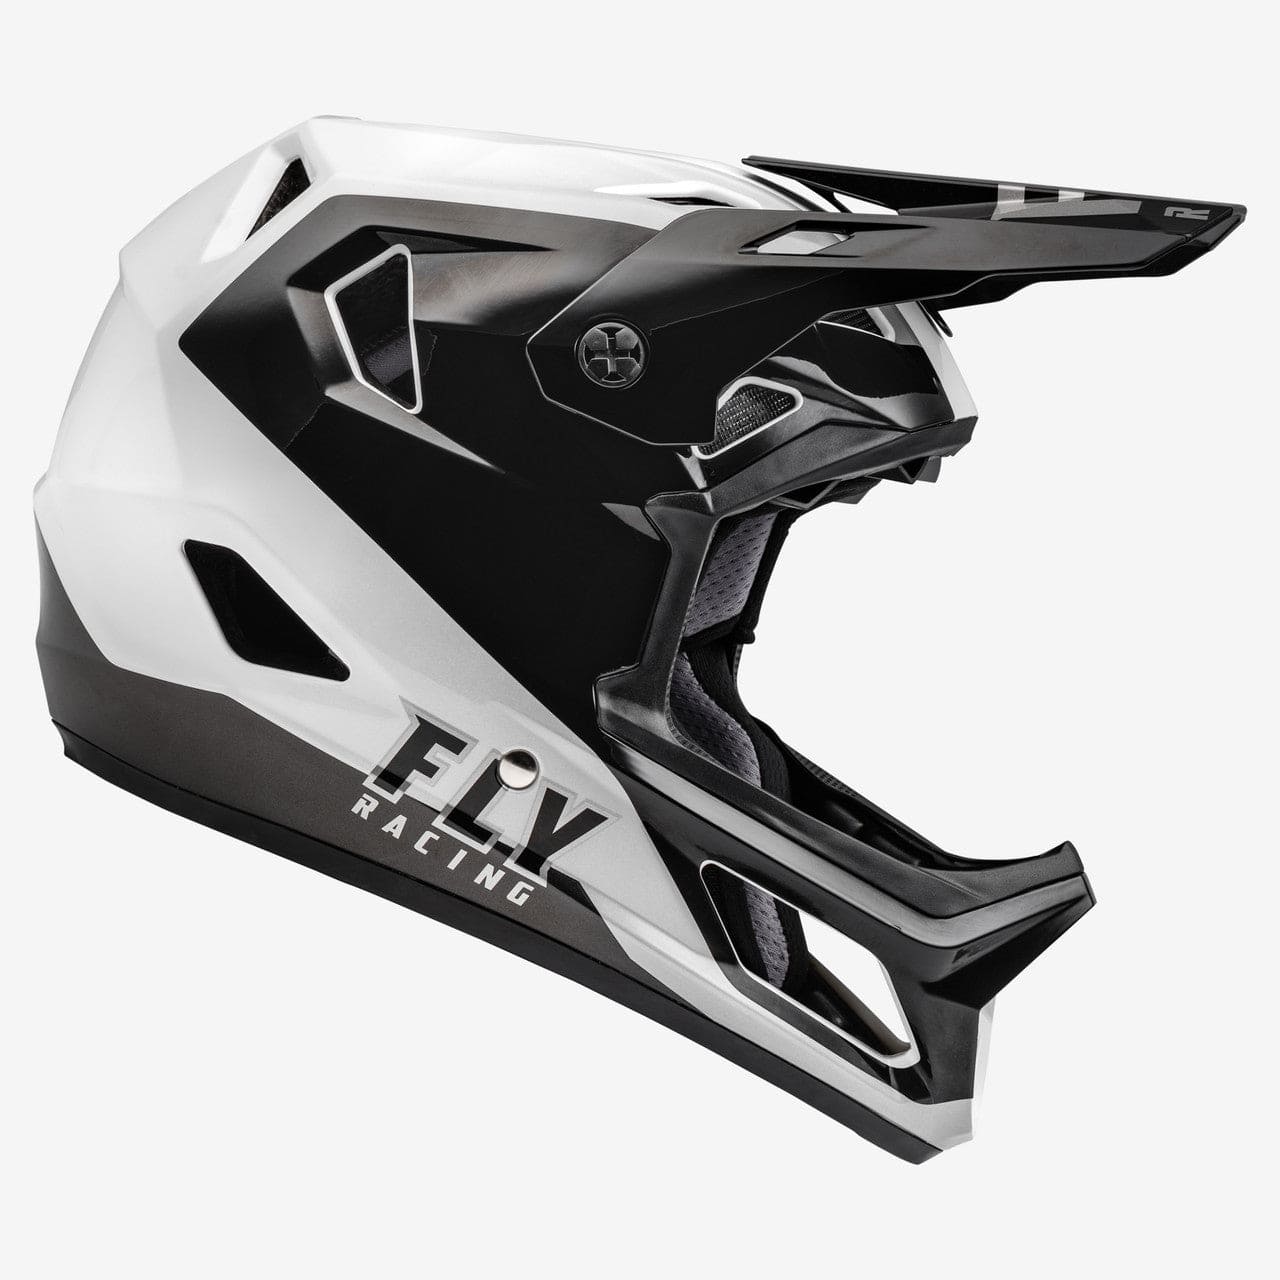 Children's BMX Helmet- FLY Rayce (Size Youth XL/Adult XS) Black and White